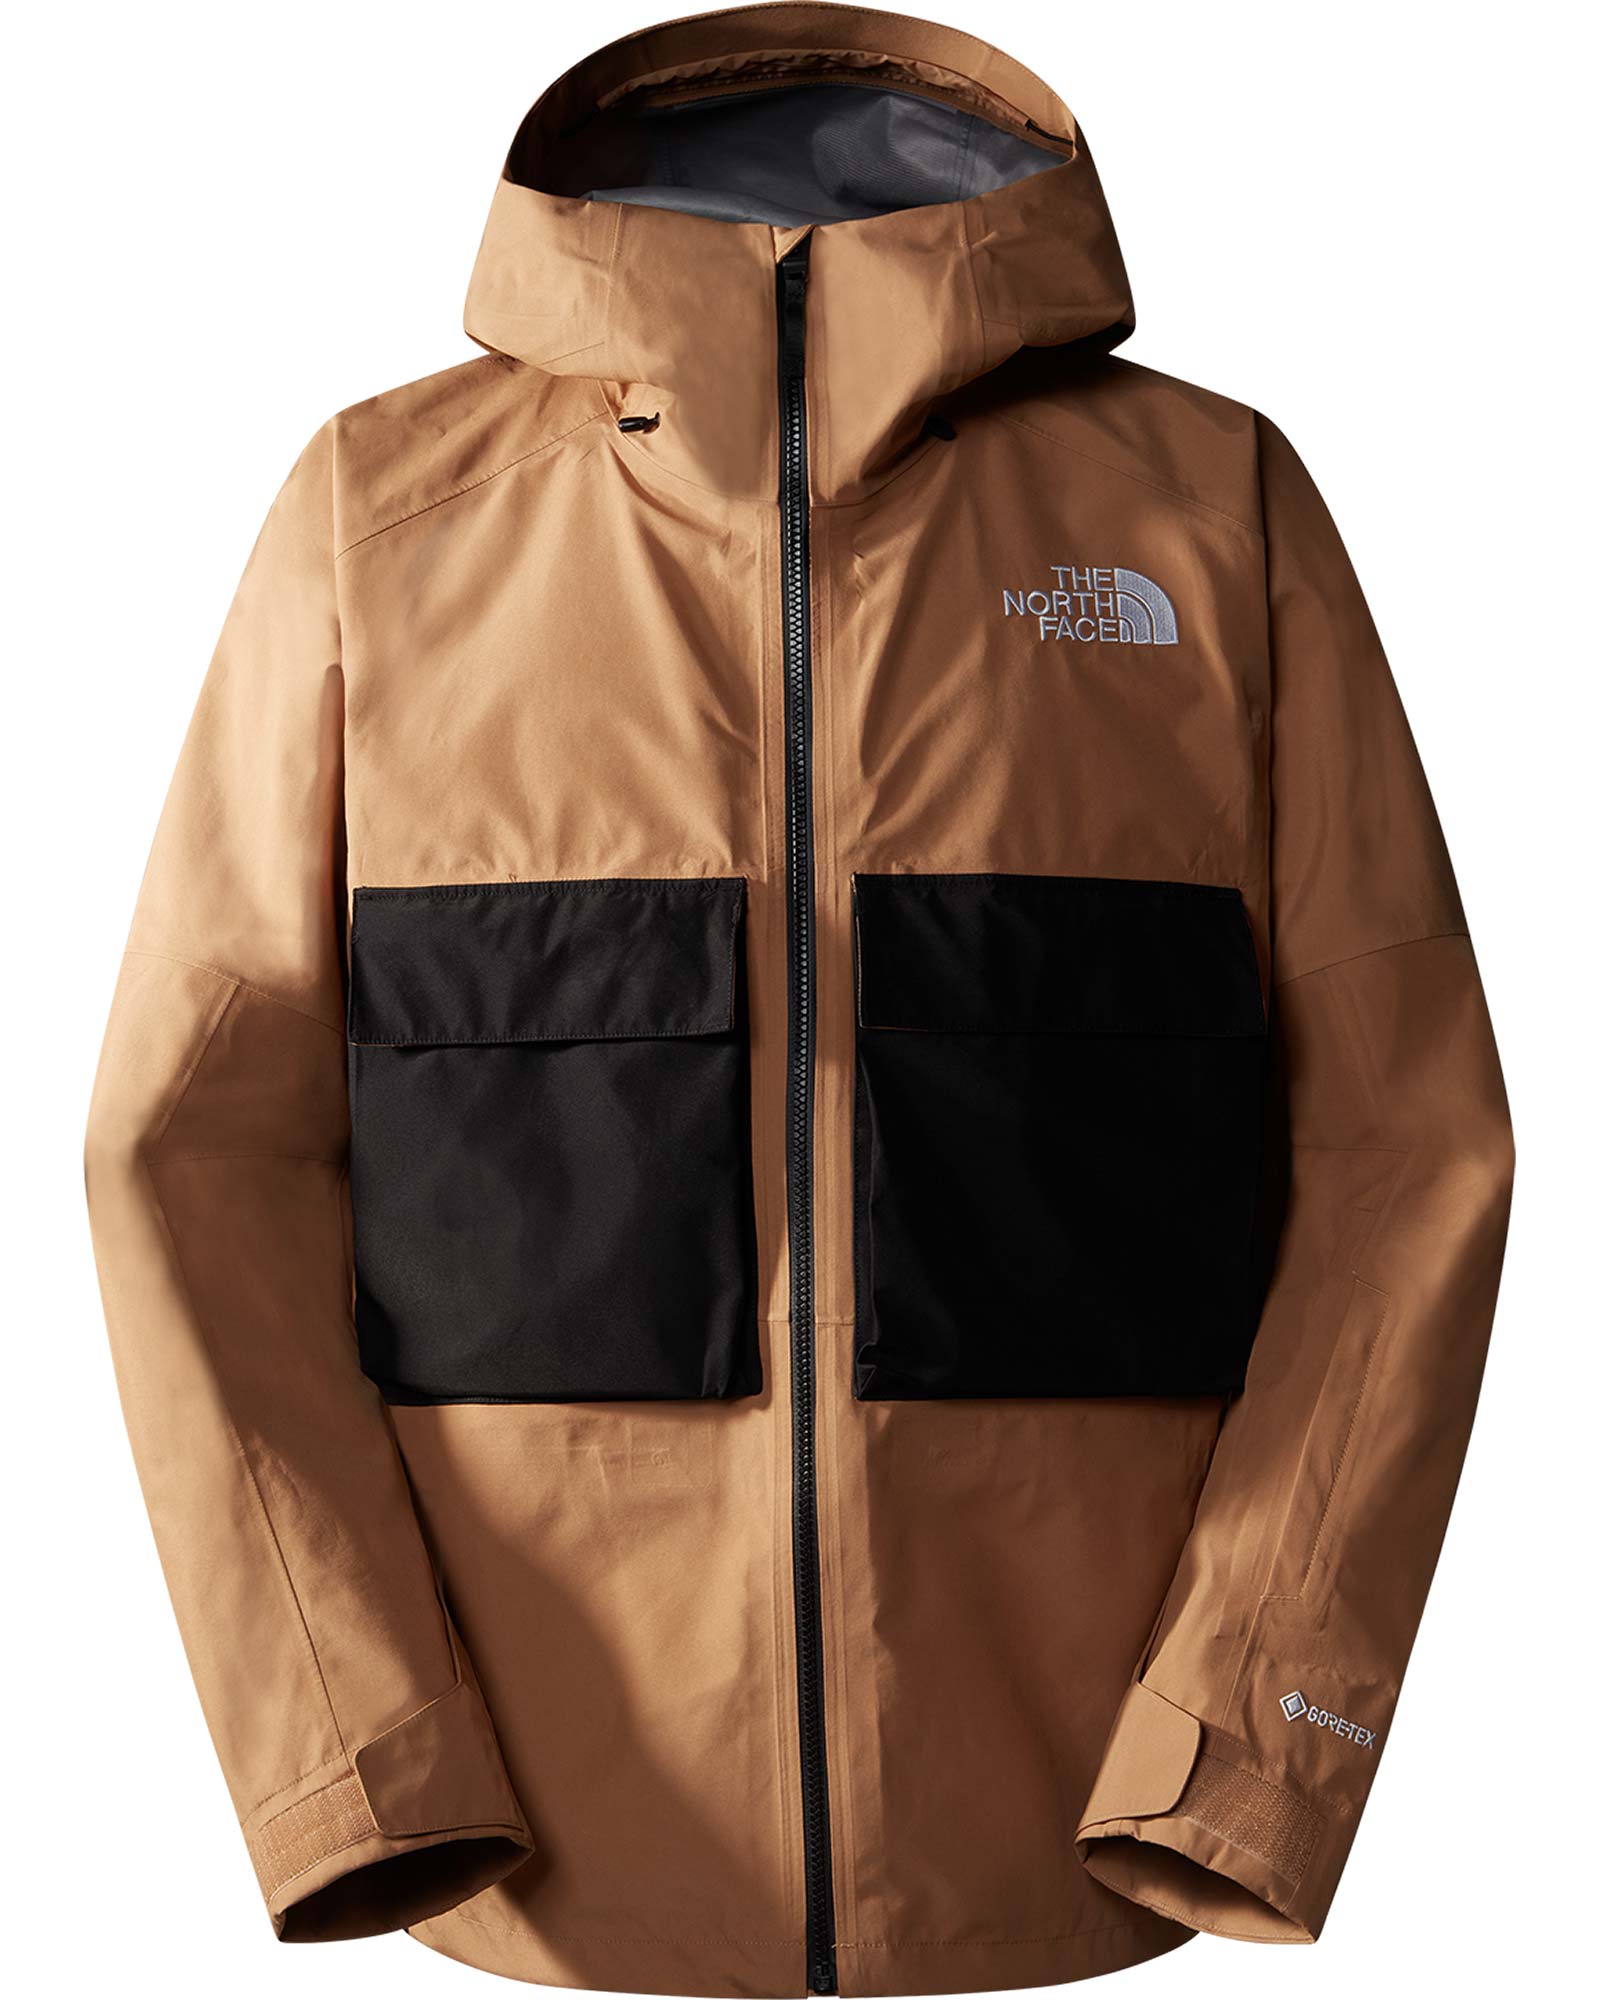 The North Face Men’s Sidecut GORE TEX Jacket - Almond Butter XL